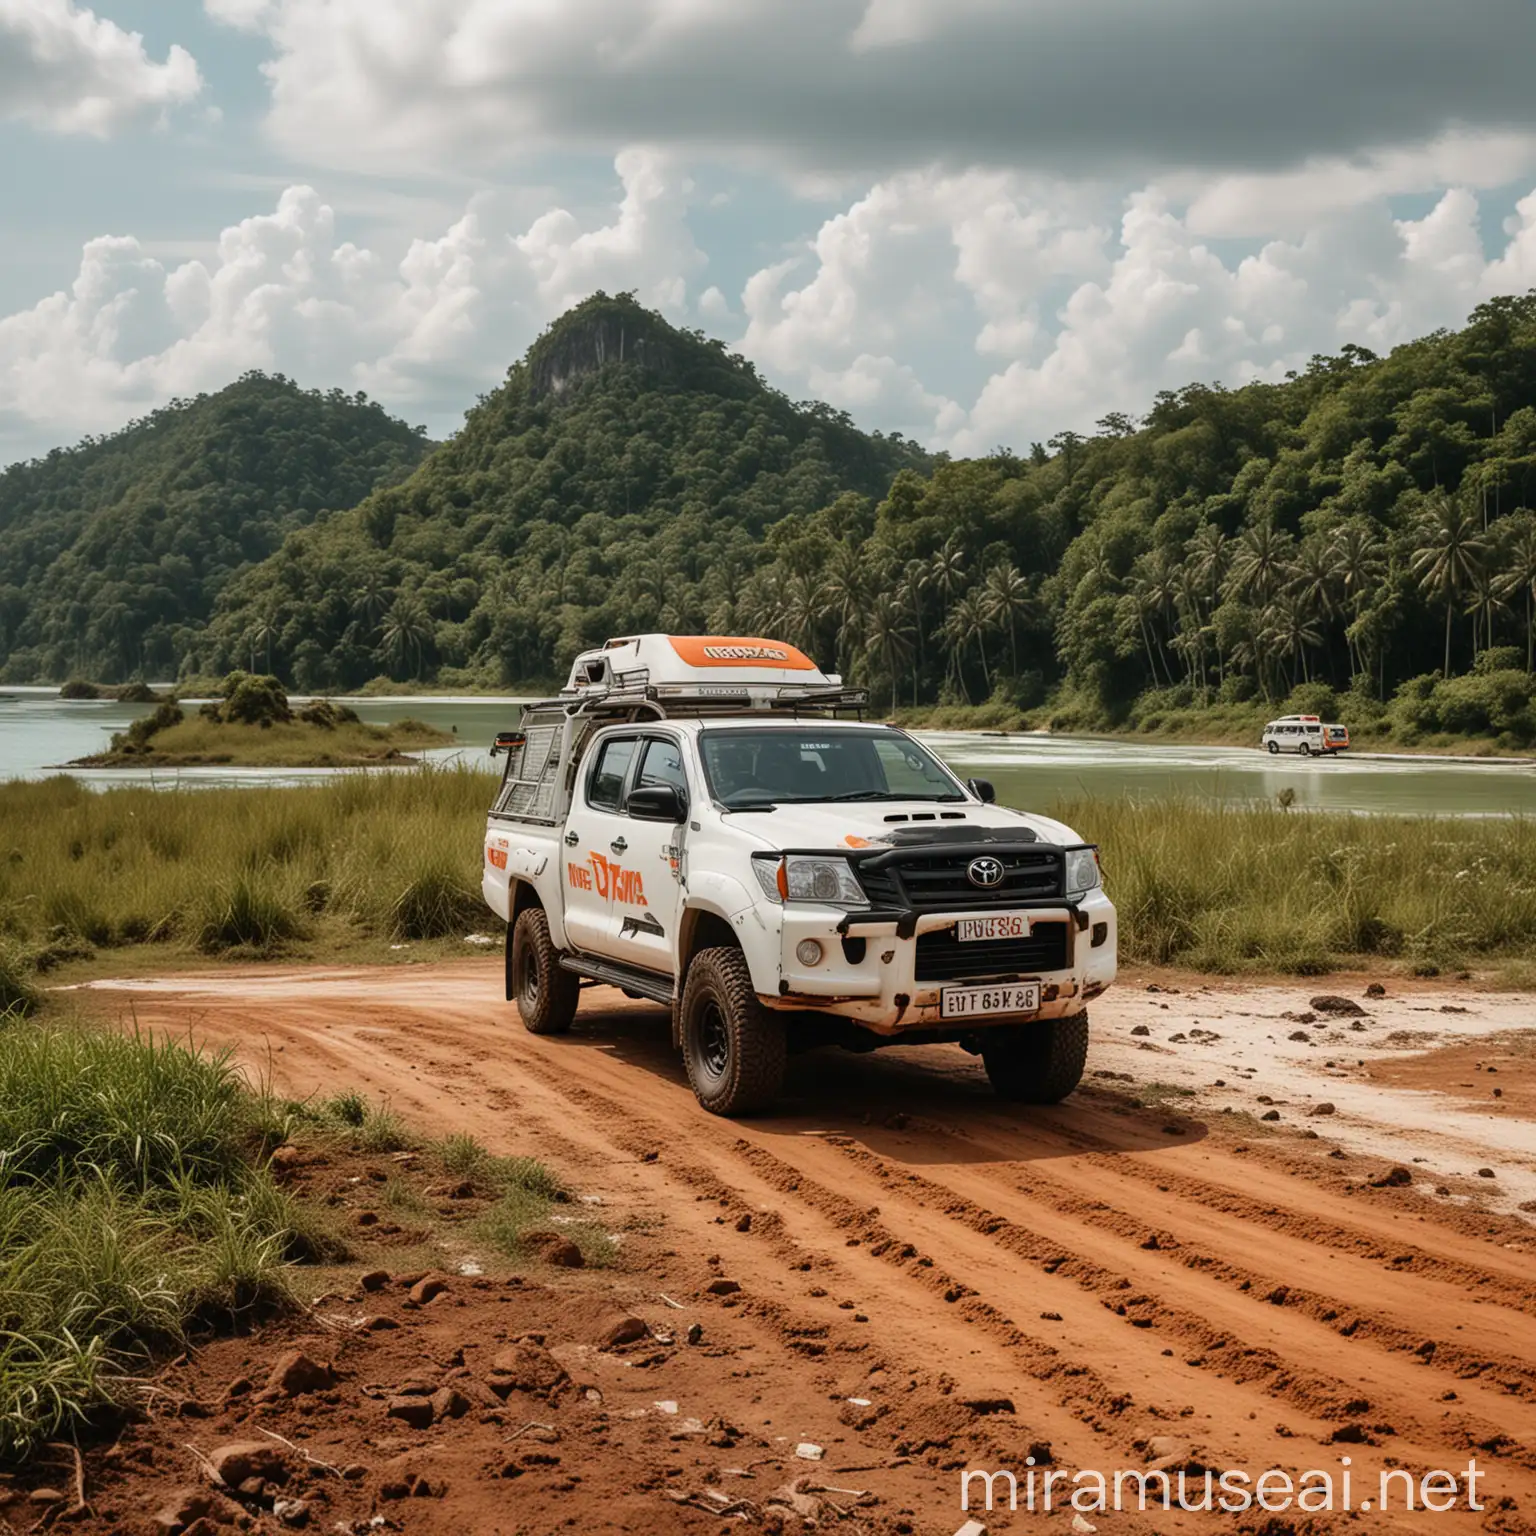 panoramic view over thai islands, white Toyota Hilux with a small but  adventurous motorhome conversion, off road tires, truck is slightly dirty, bold orange logo saying 'Indie Campers' on the side of the truck